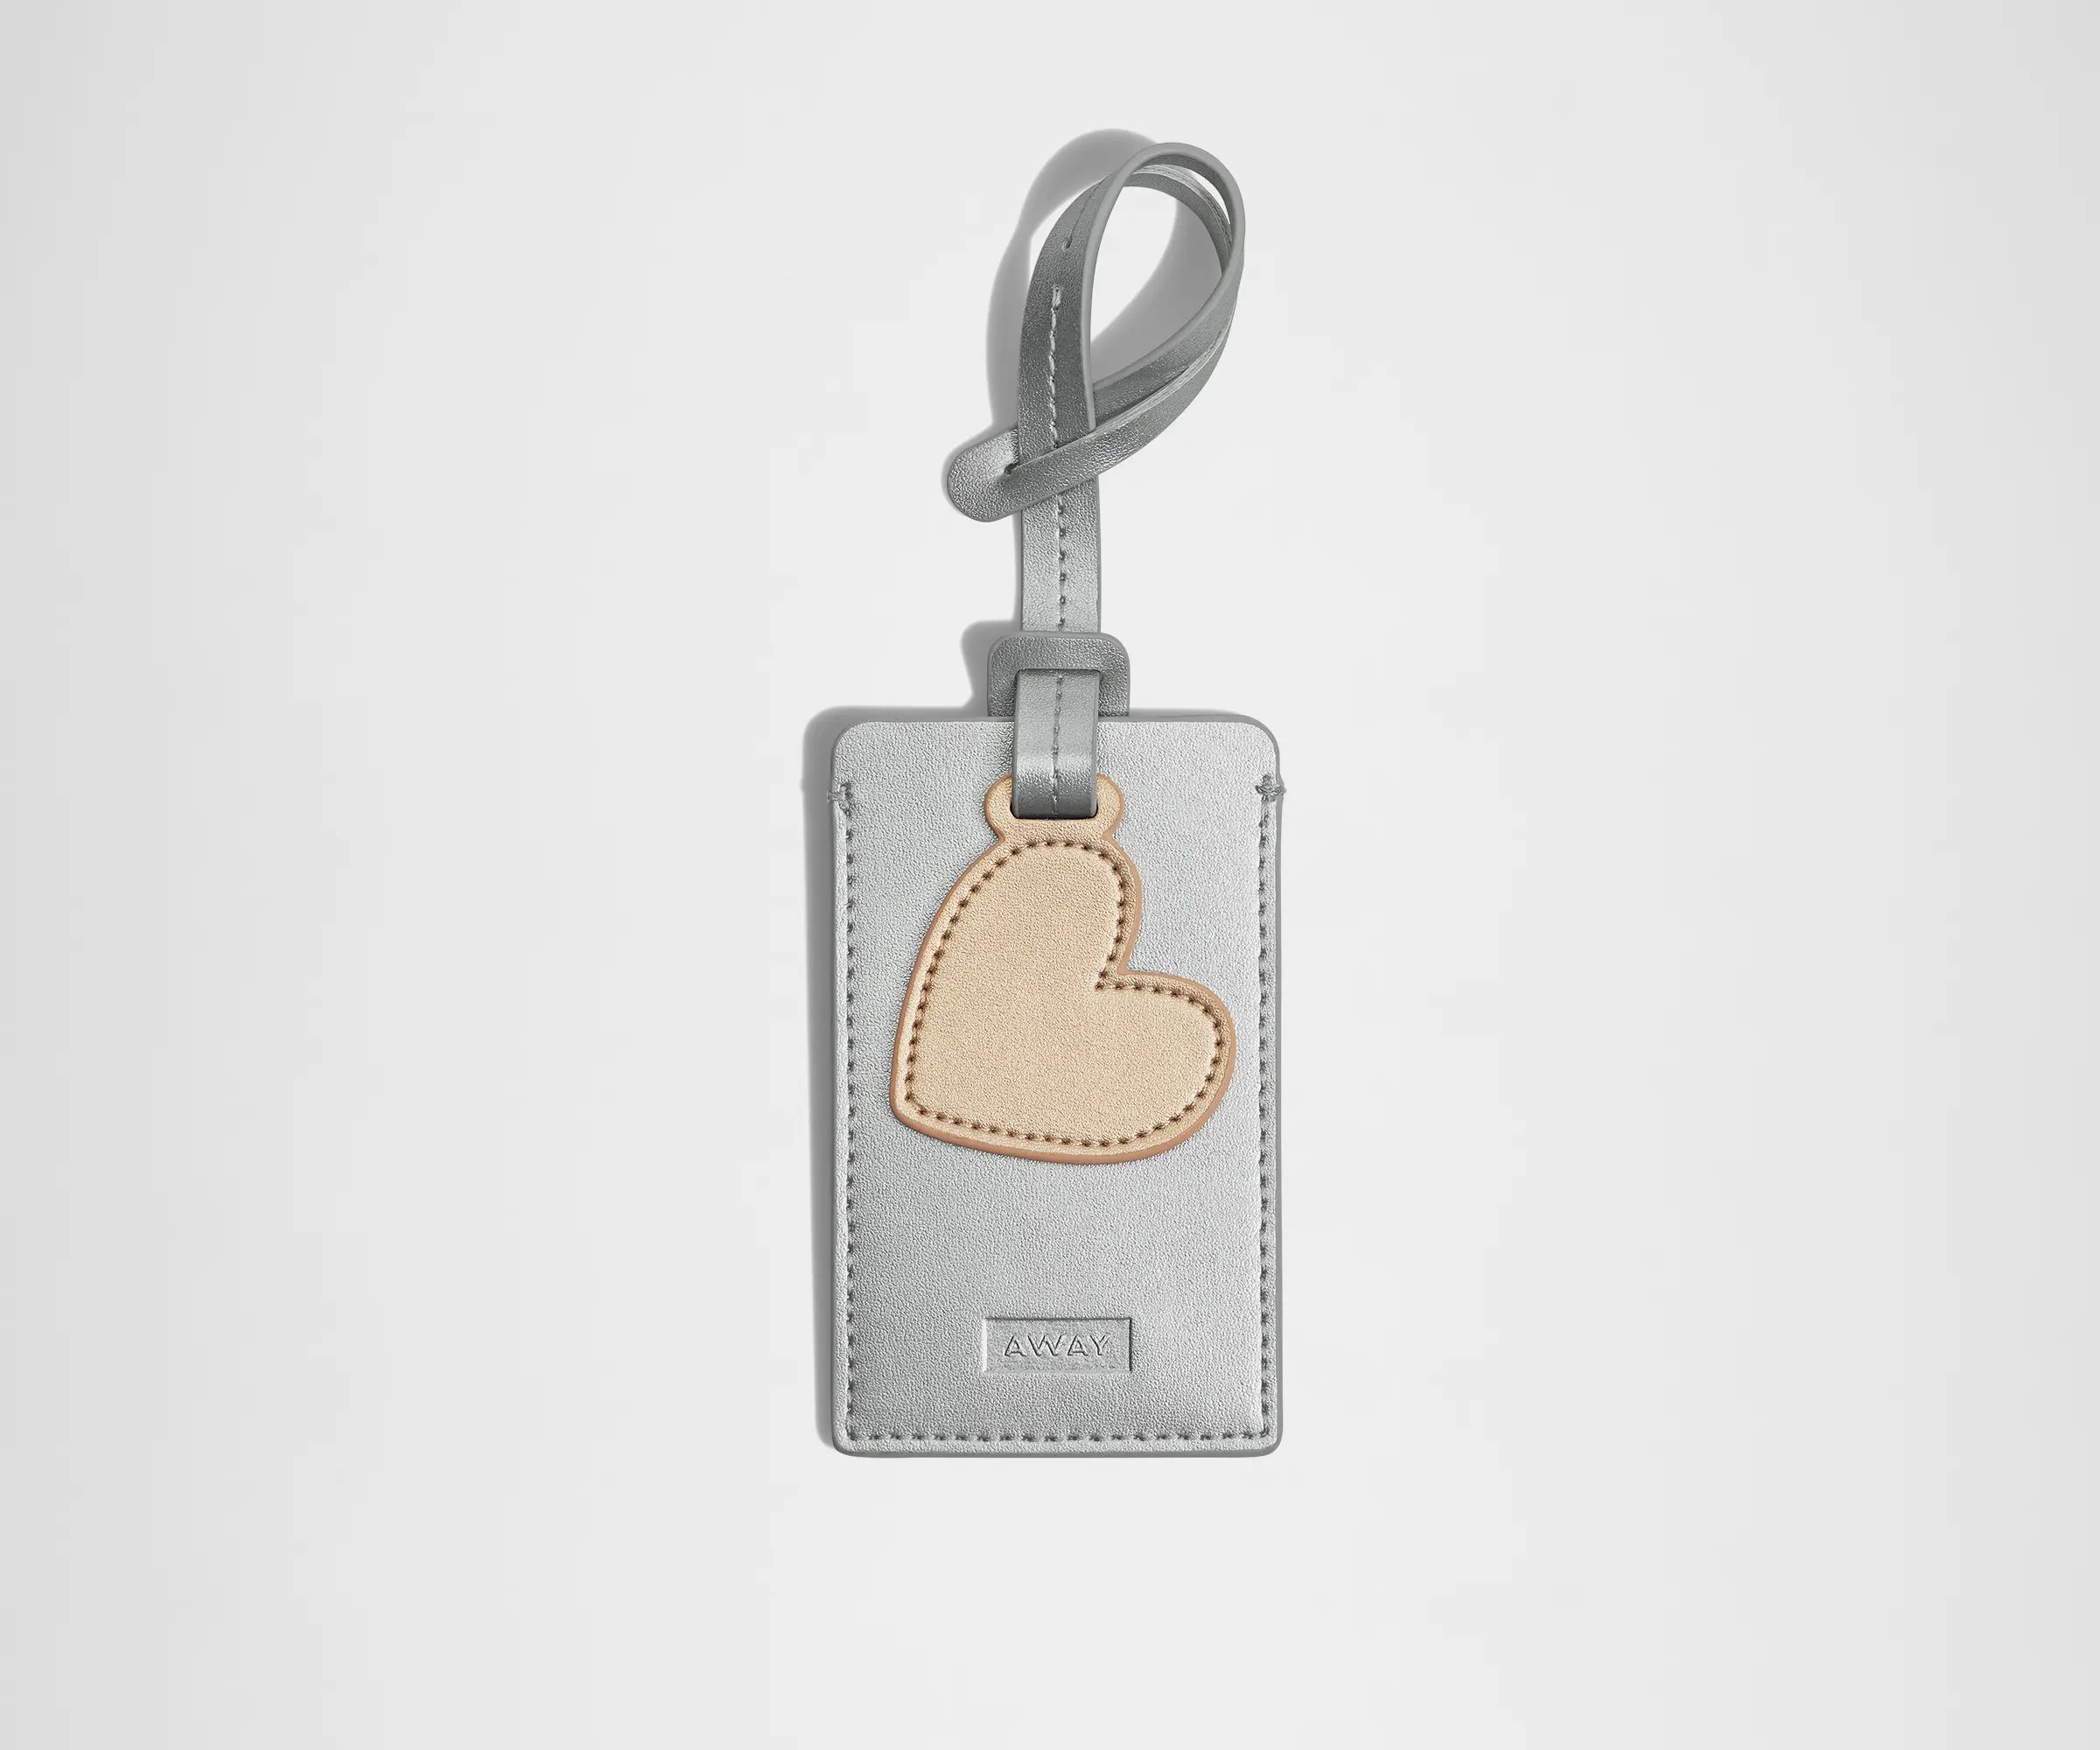 The Luggage Tag & Charm Duo | Away